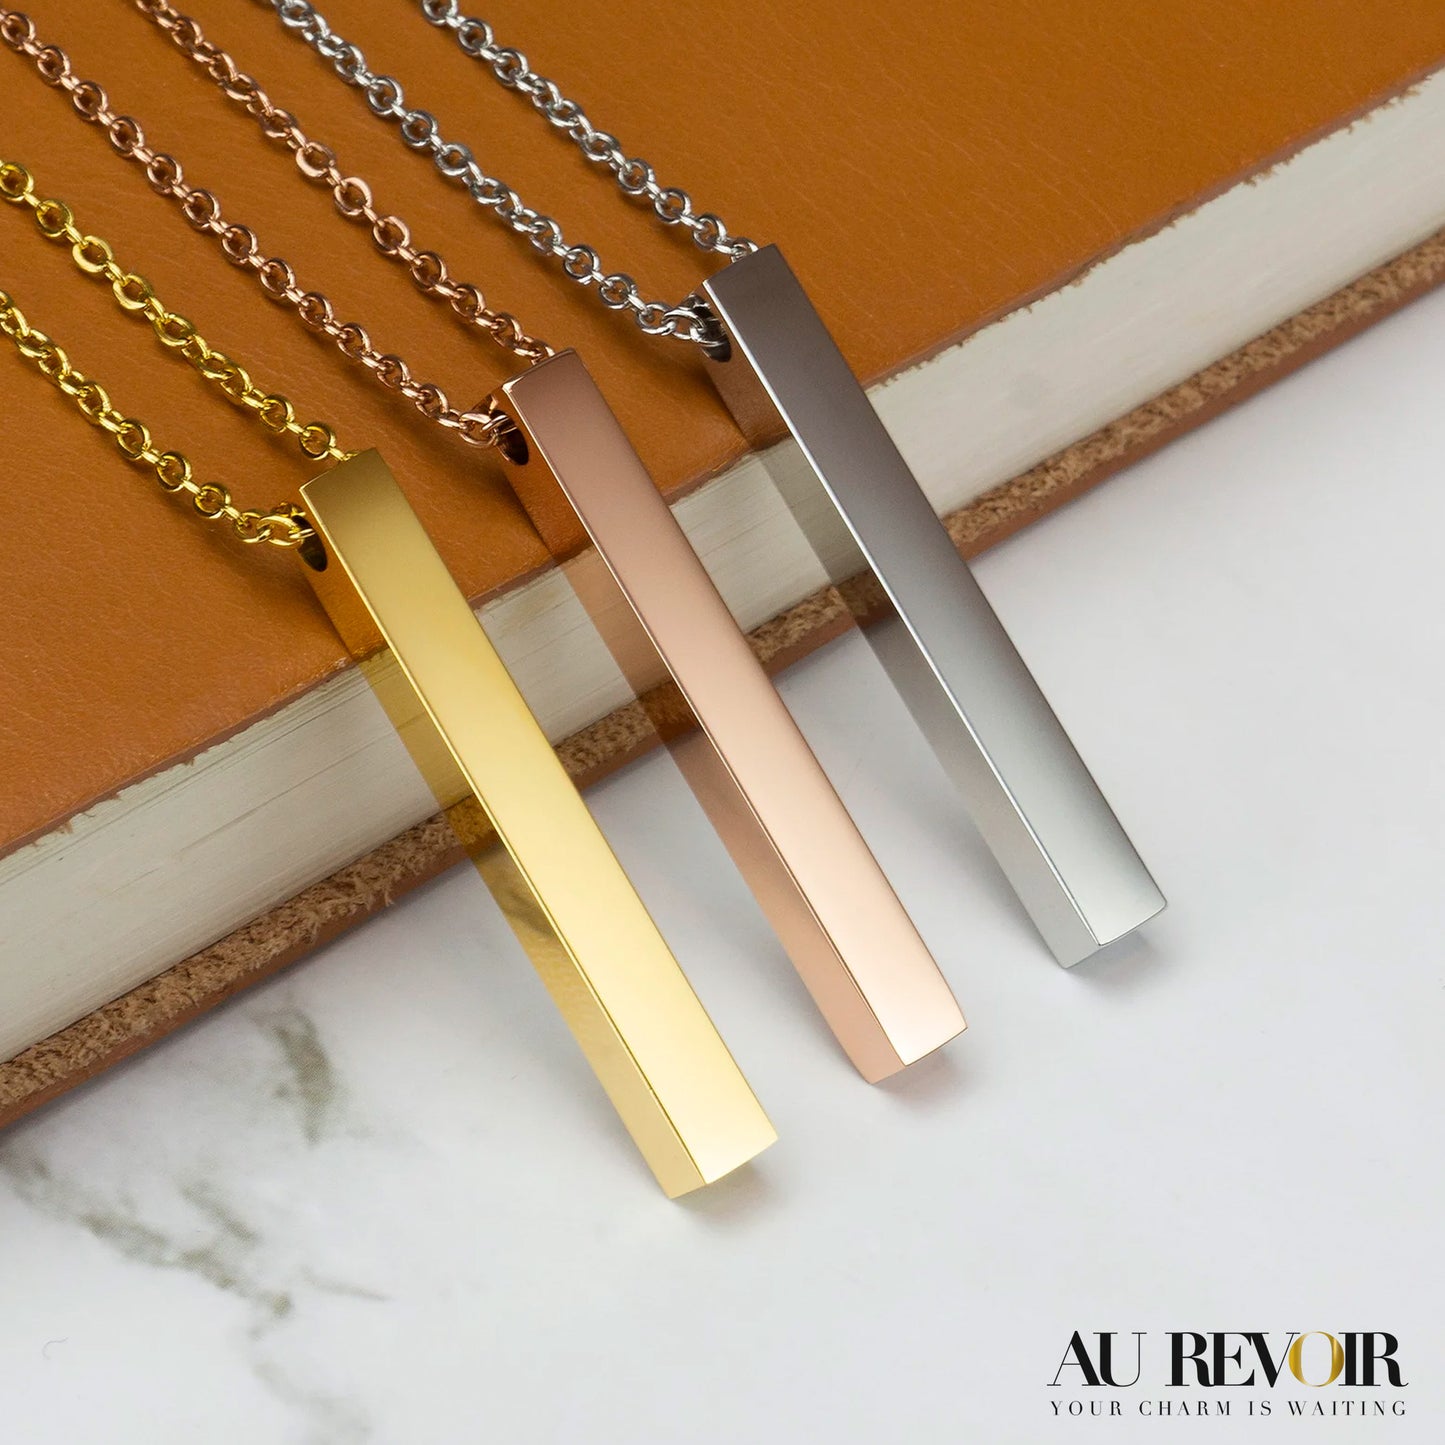 Cube pendant gold pendant rose gold pendant silver pendant stainless steel product personalised with custom name engraving 